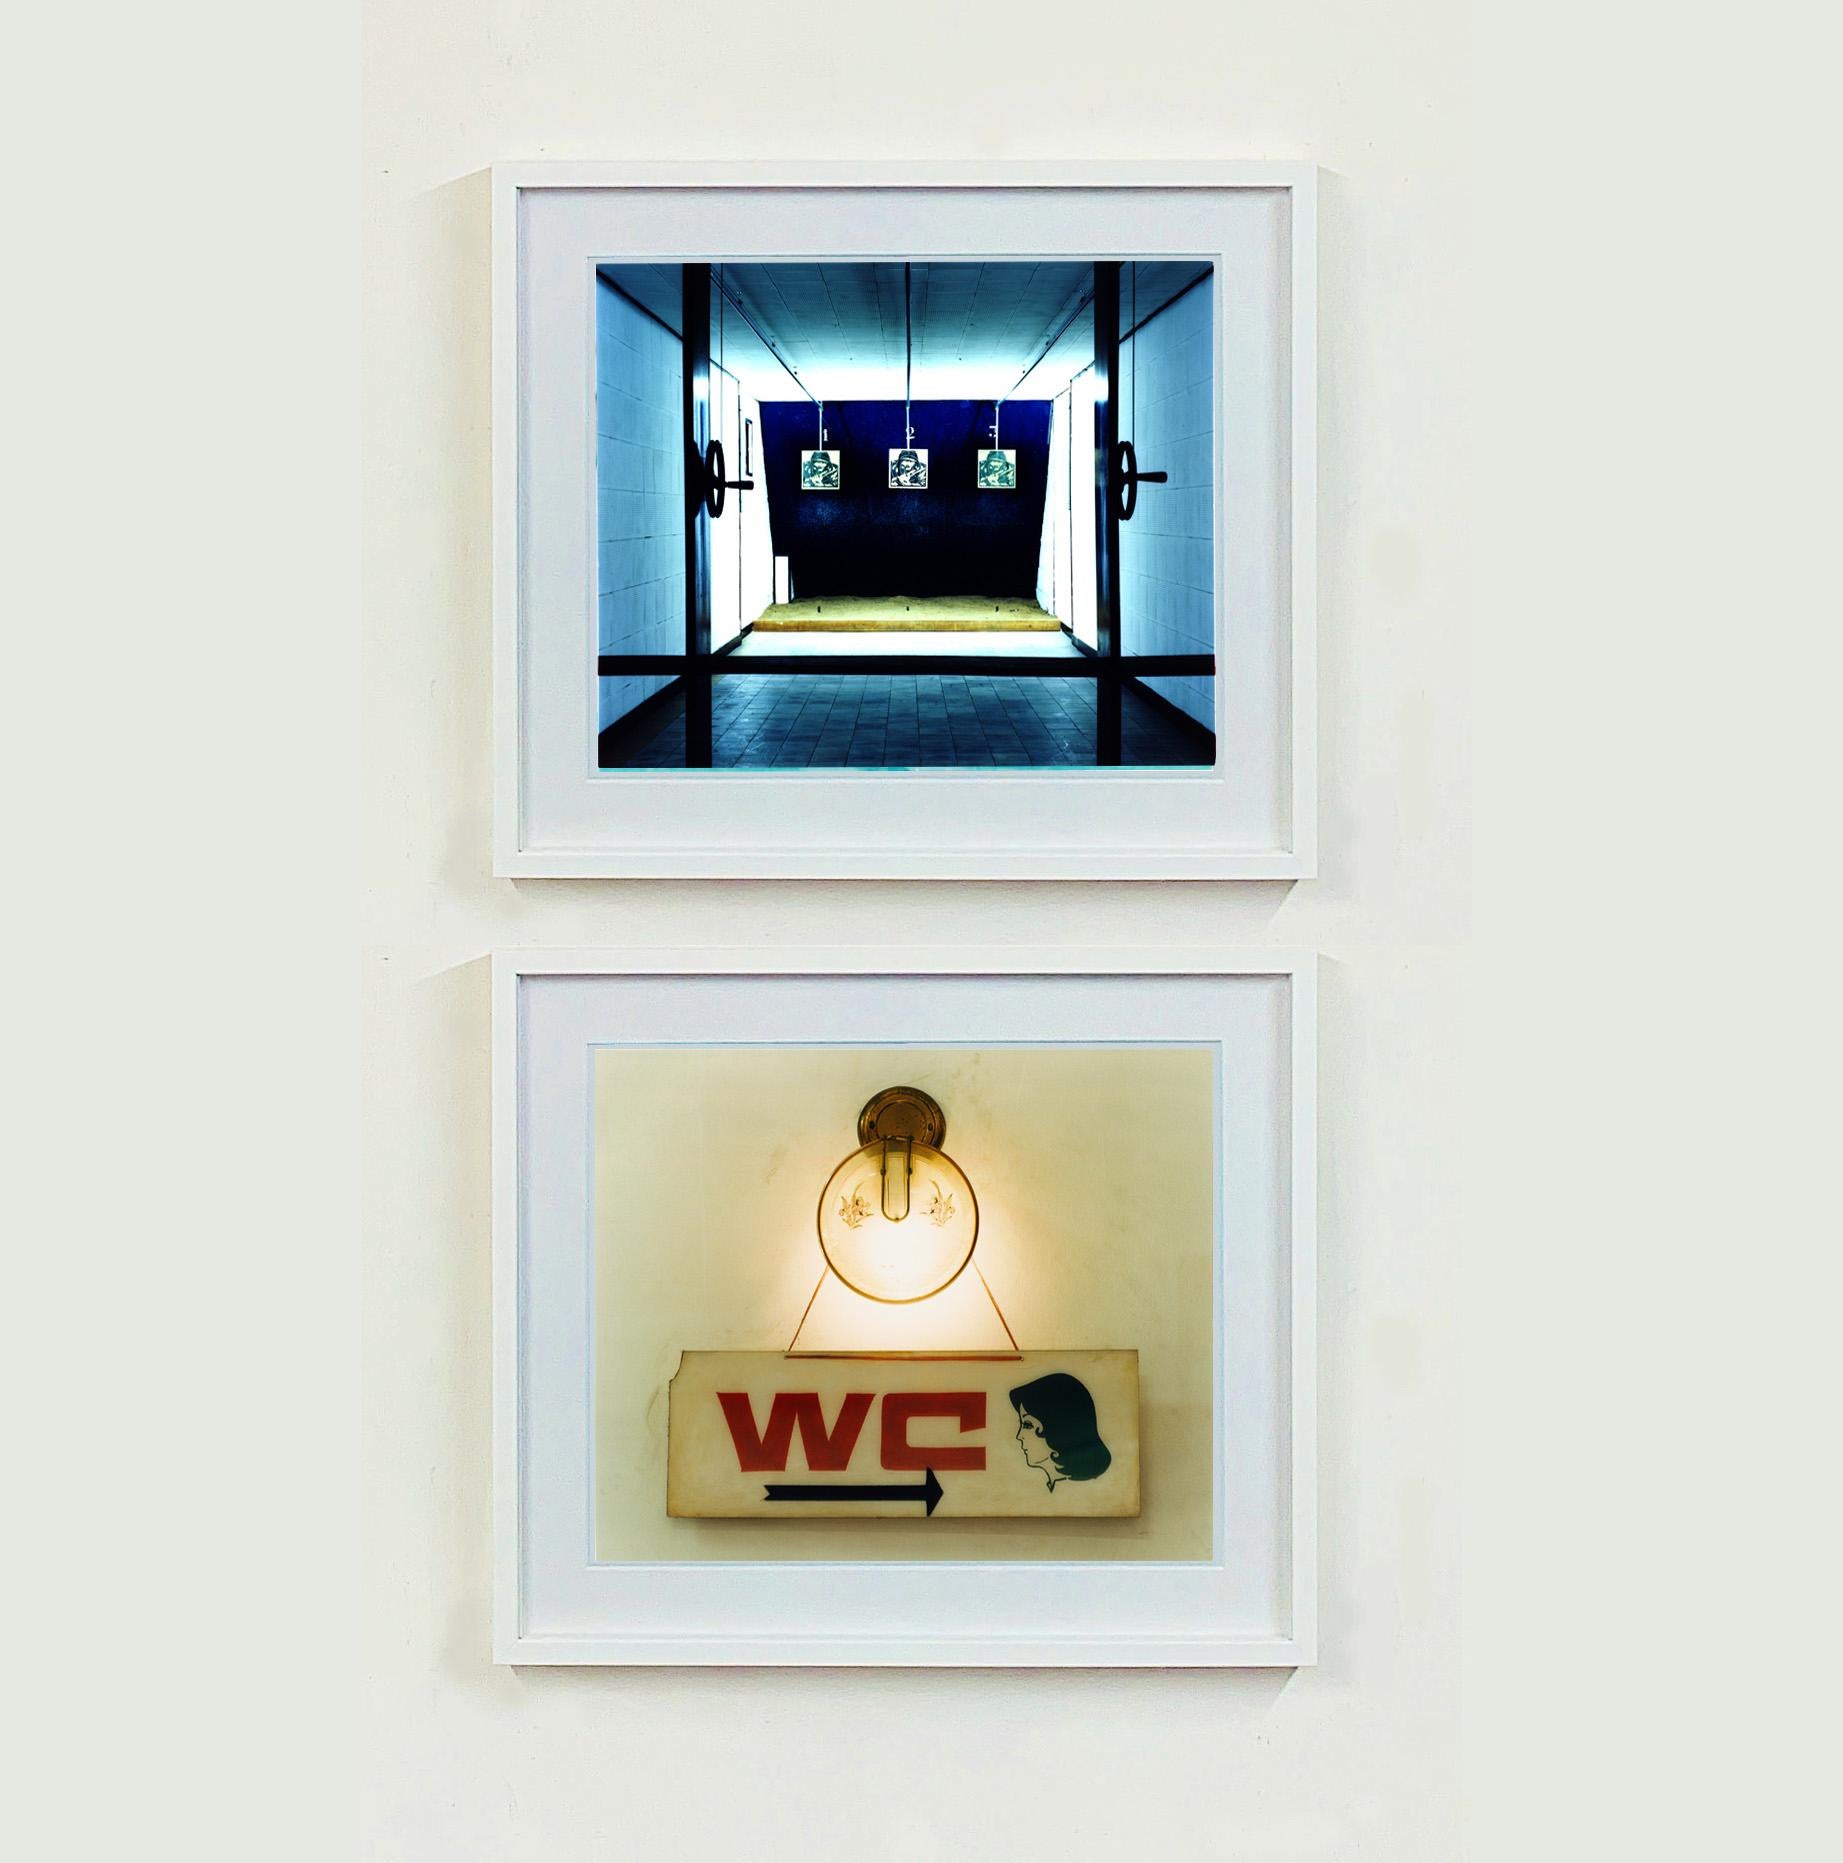 WC, a retro kitsch vintage sign captured in Ho Chi Minh City, Vietnam.

This artwork is a limited edition of 25 gloss photographic print, dry-mounted to aluminium, presented in a museum board white window mount and a choice of black or white box